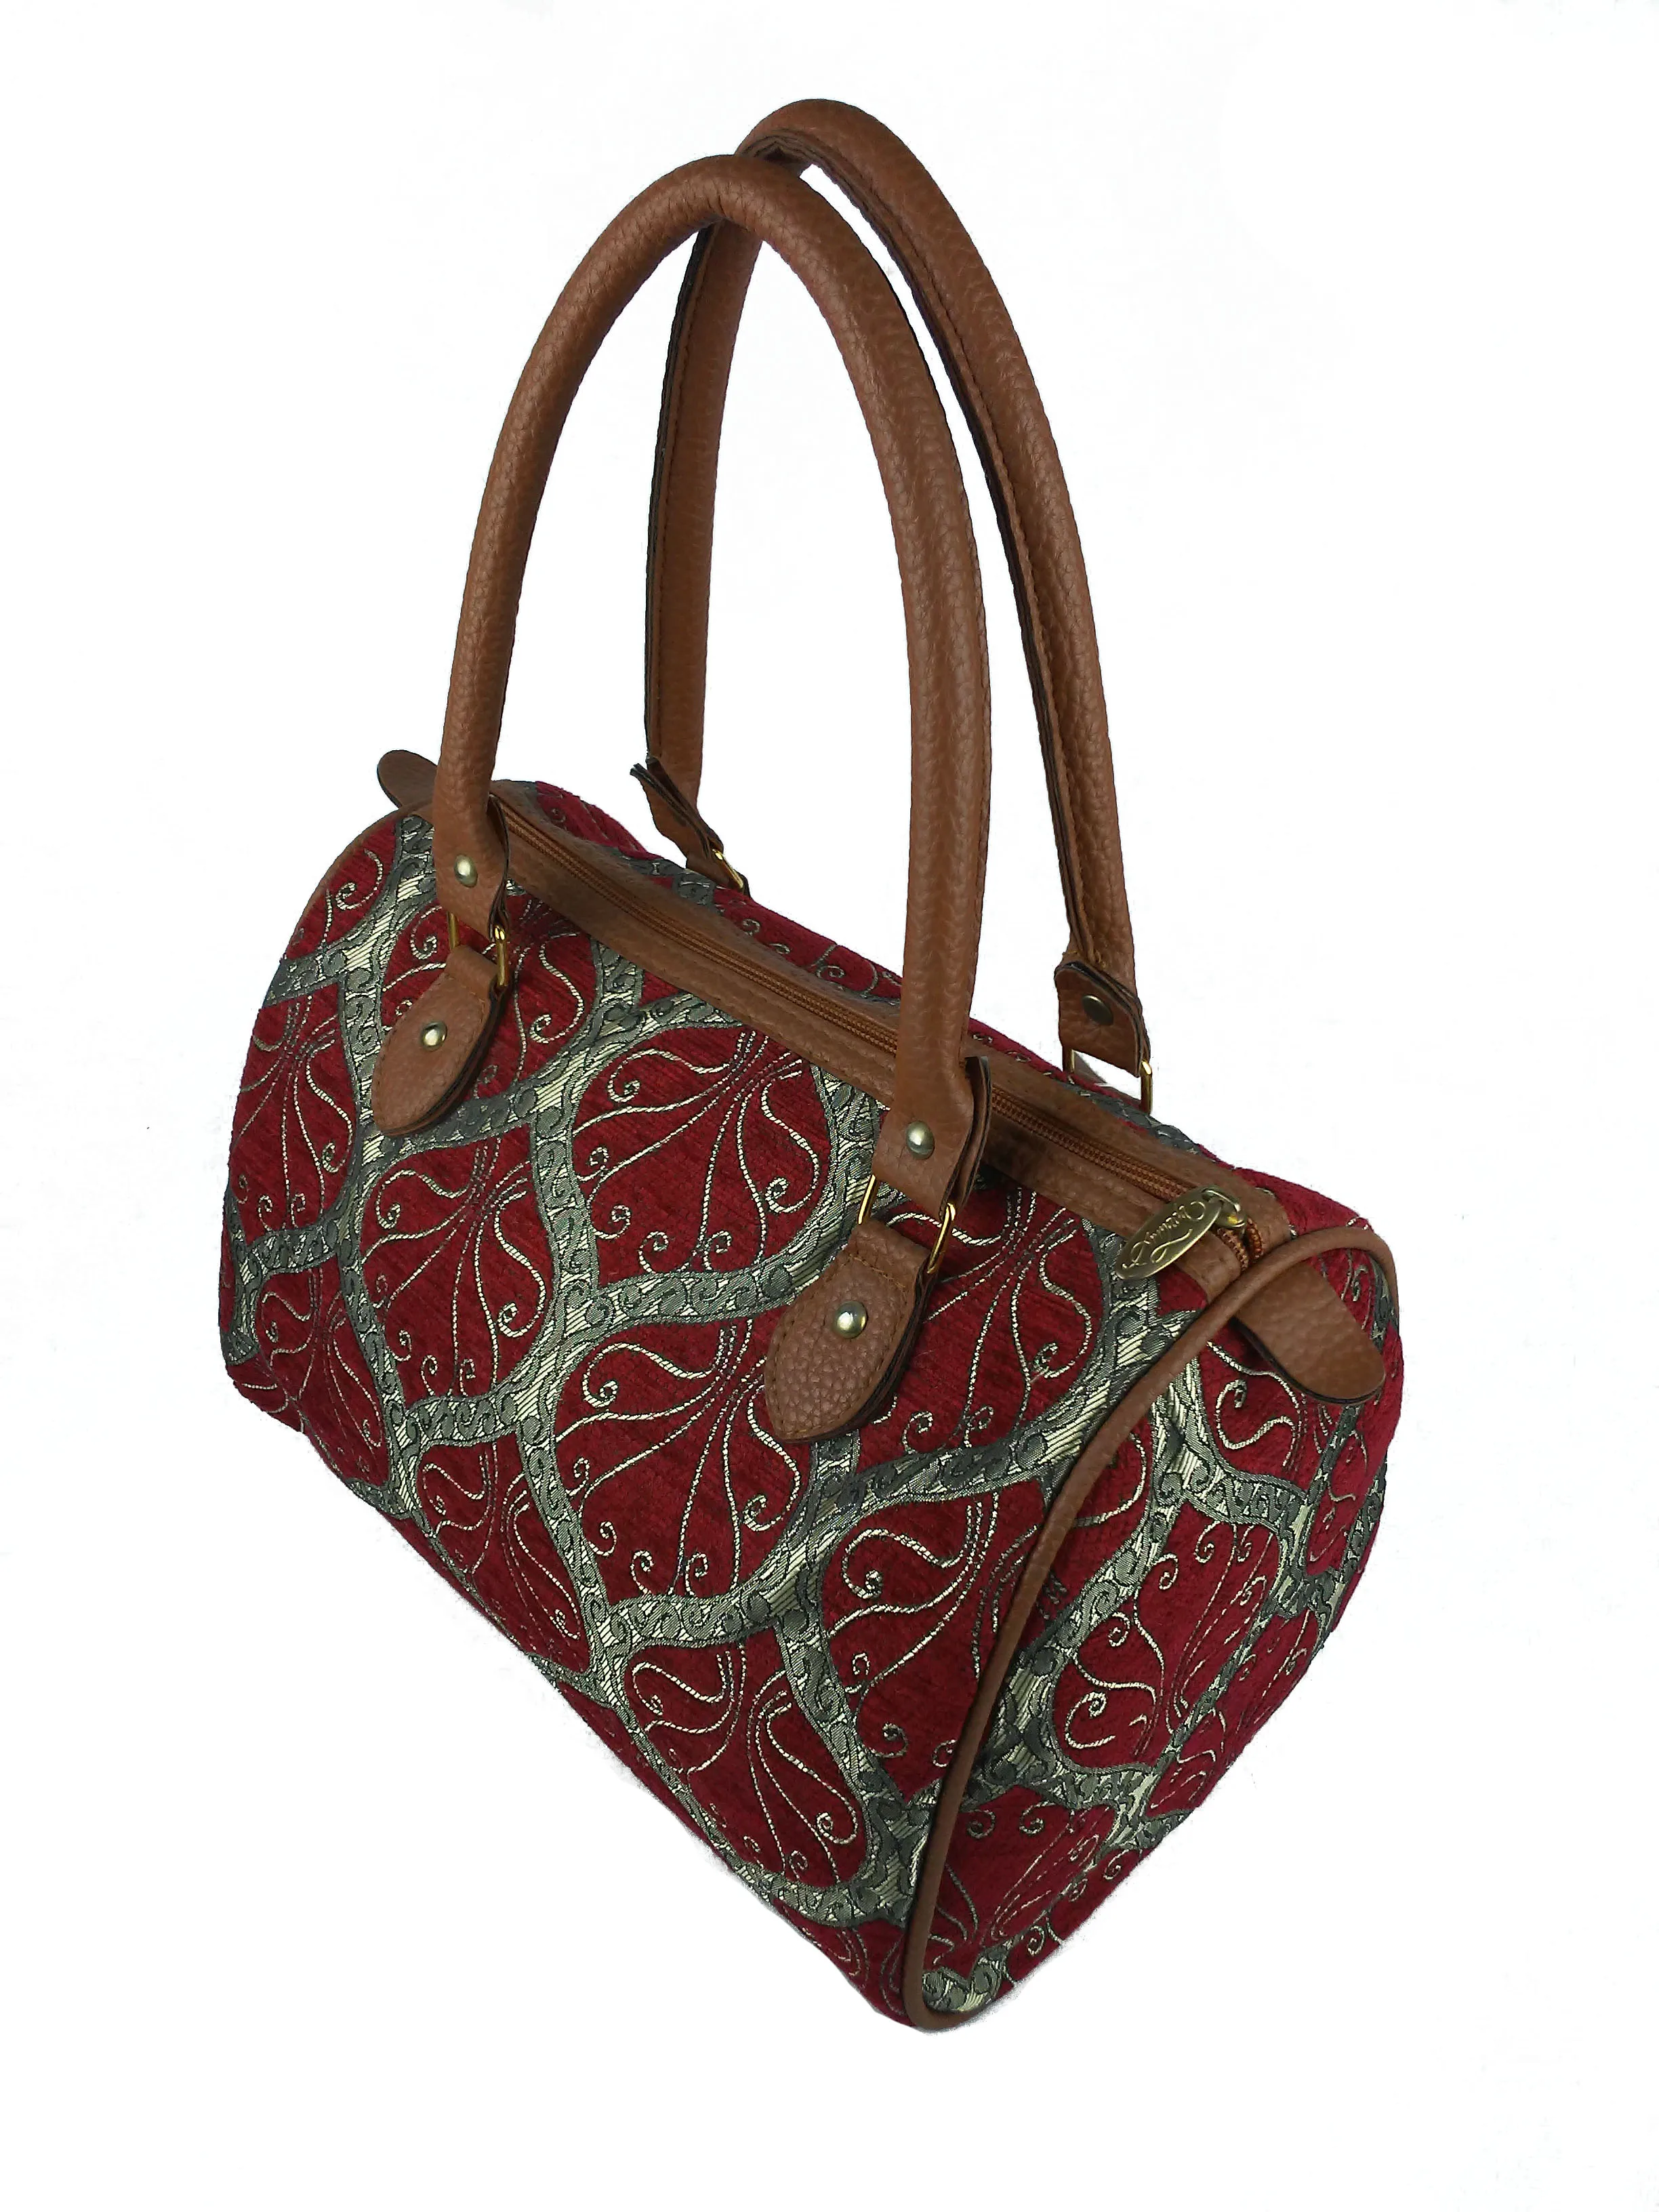 

Handmade Elegant Shoulder Bag designed with special fabric with Ottoman motifs